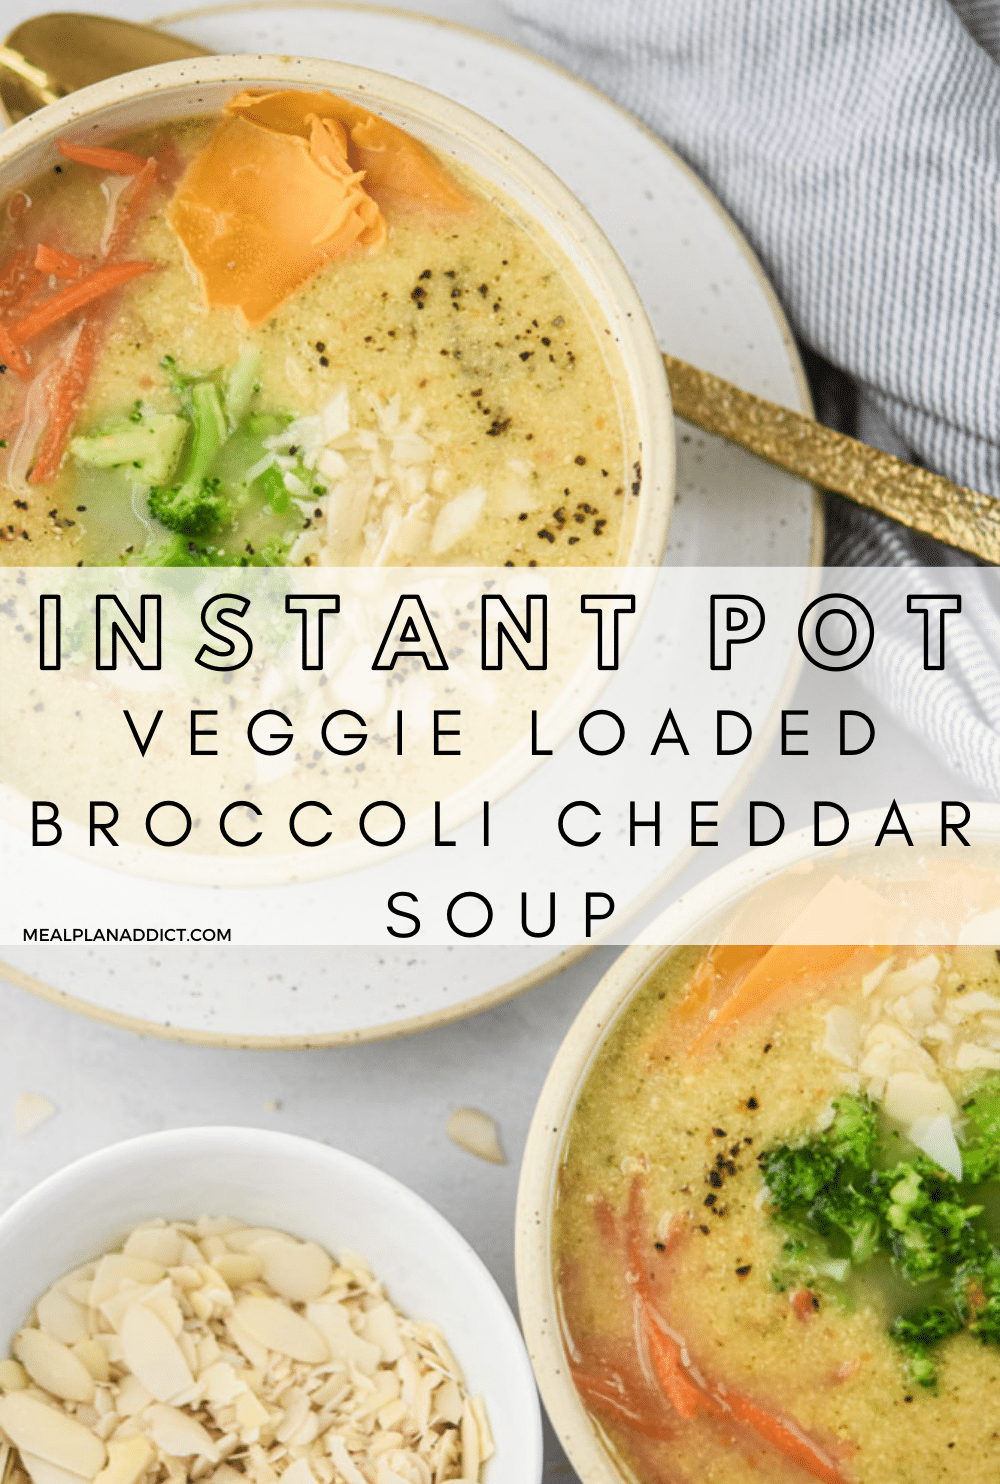 Broccoli Cheddar soup pin for Pinterest